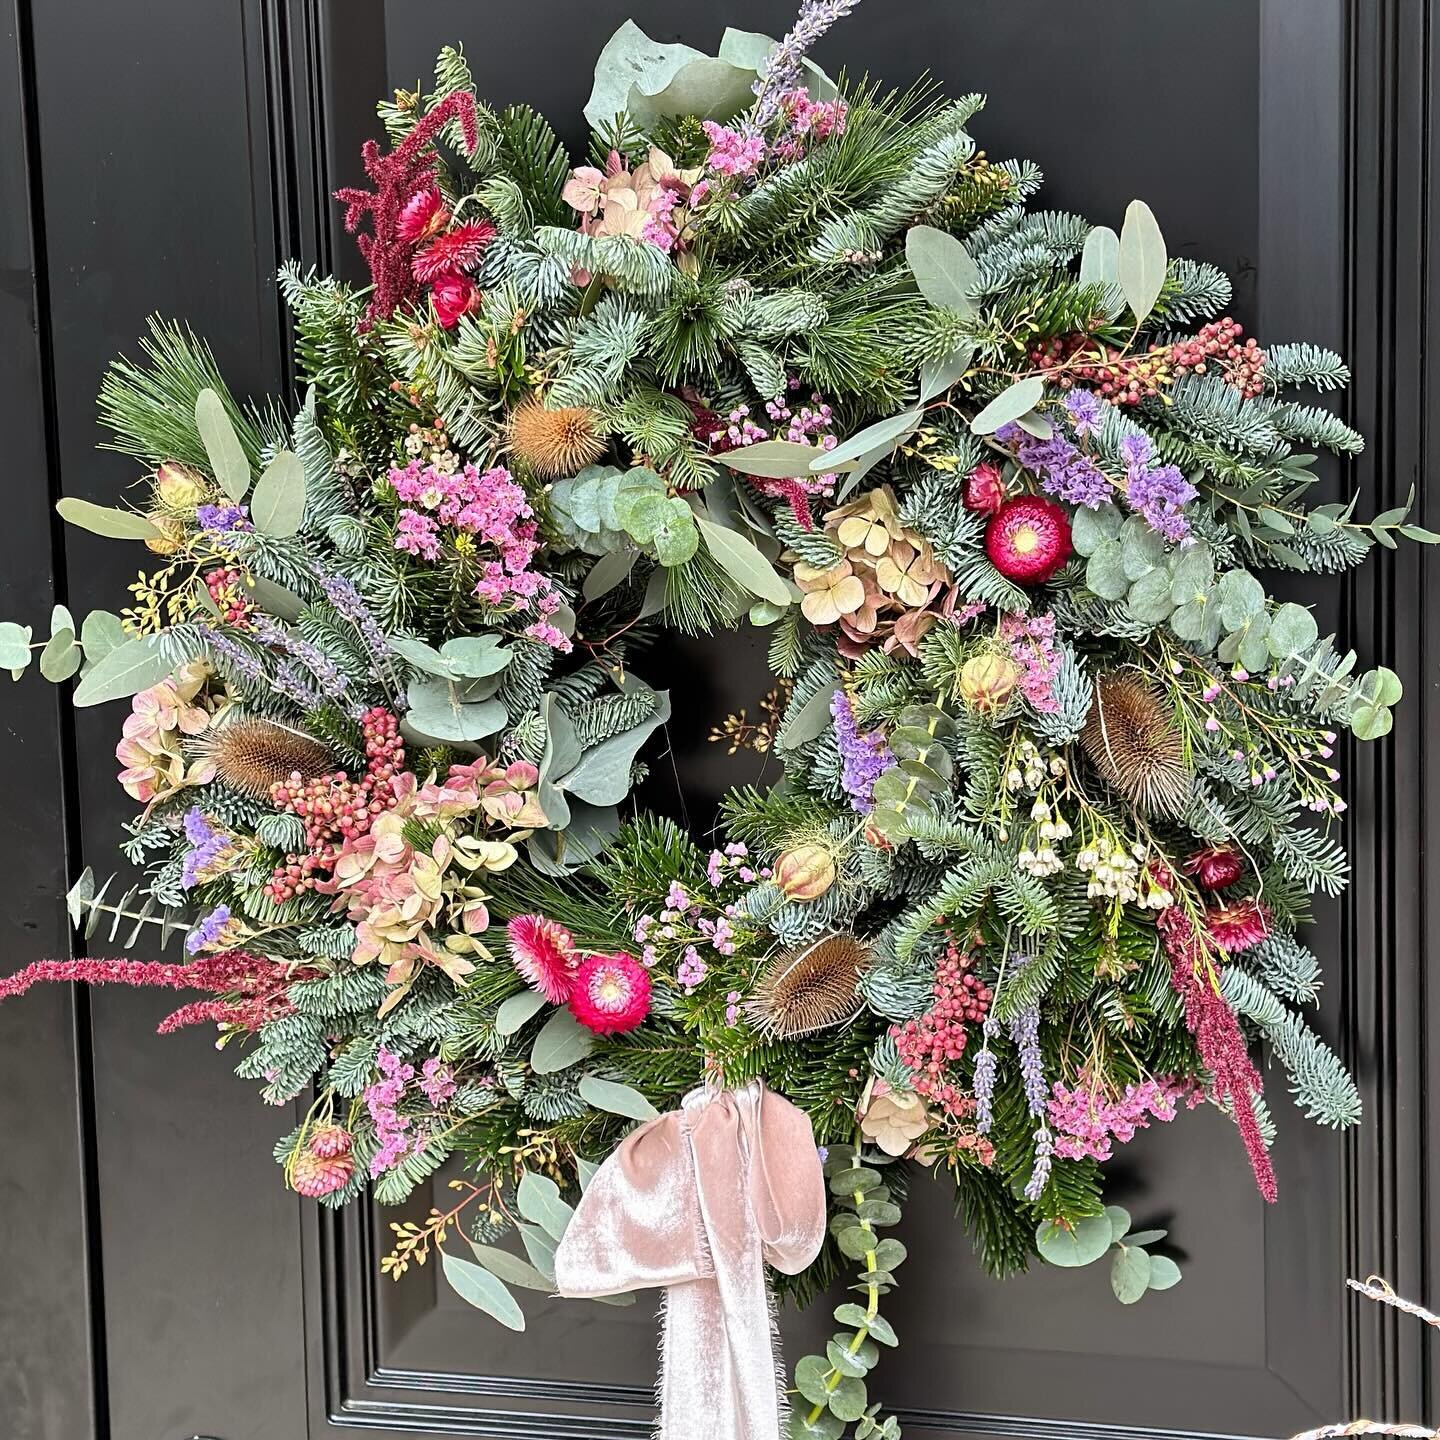 Next up&hellip; this pink number installed on a door this weekend 🙌. 

I first made this kind of wreath last year and it proved so popular that it made a reappearance this year 🎉

Last push on wreaths this week! 💪

#wreath #wreathmaker #bespokewre